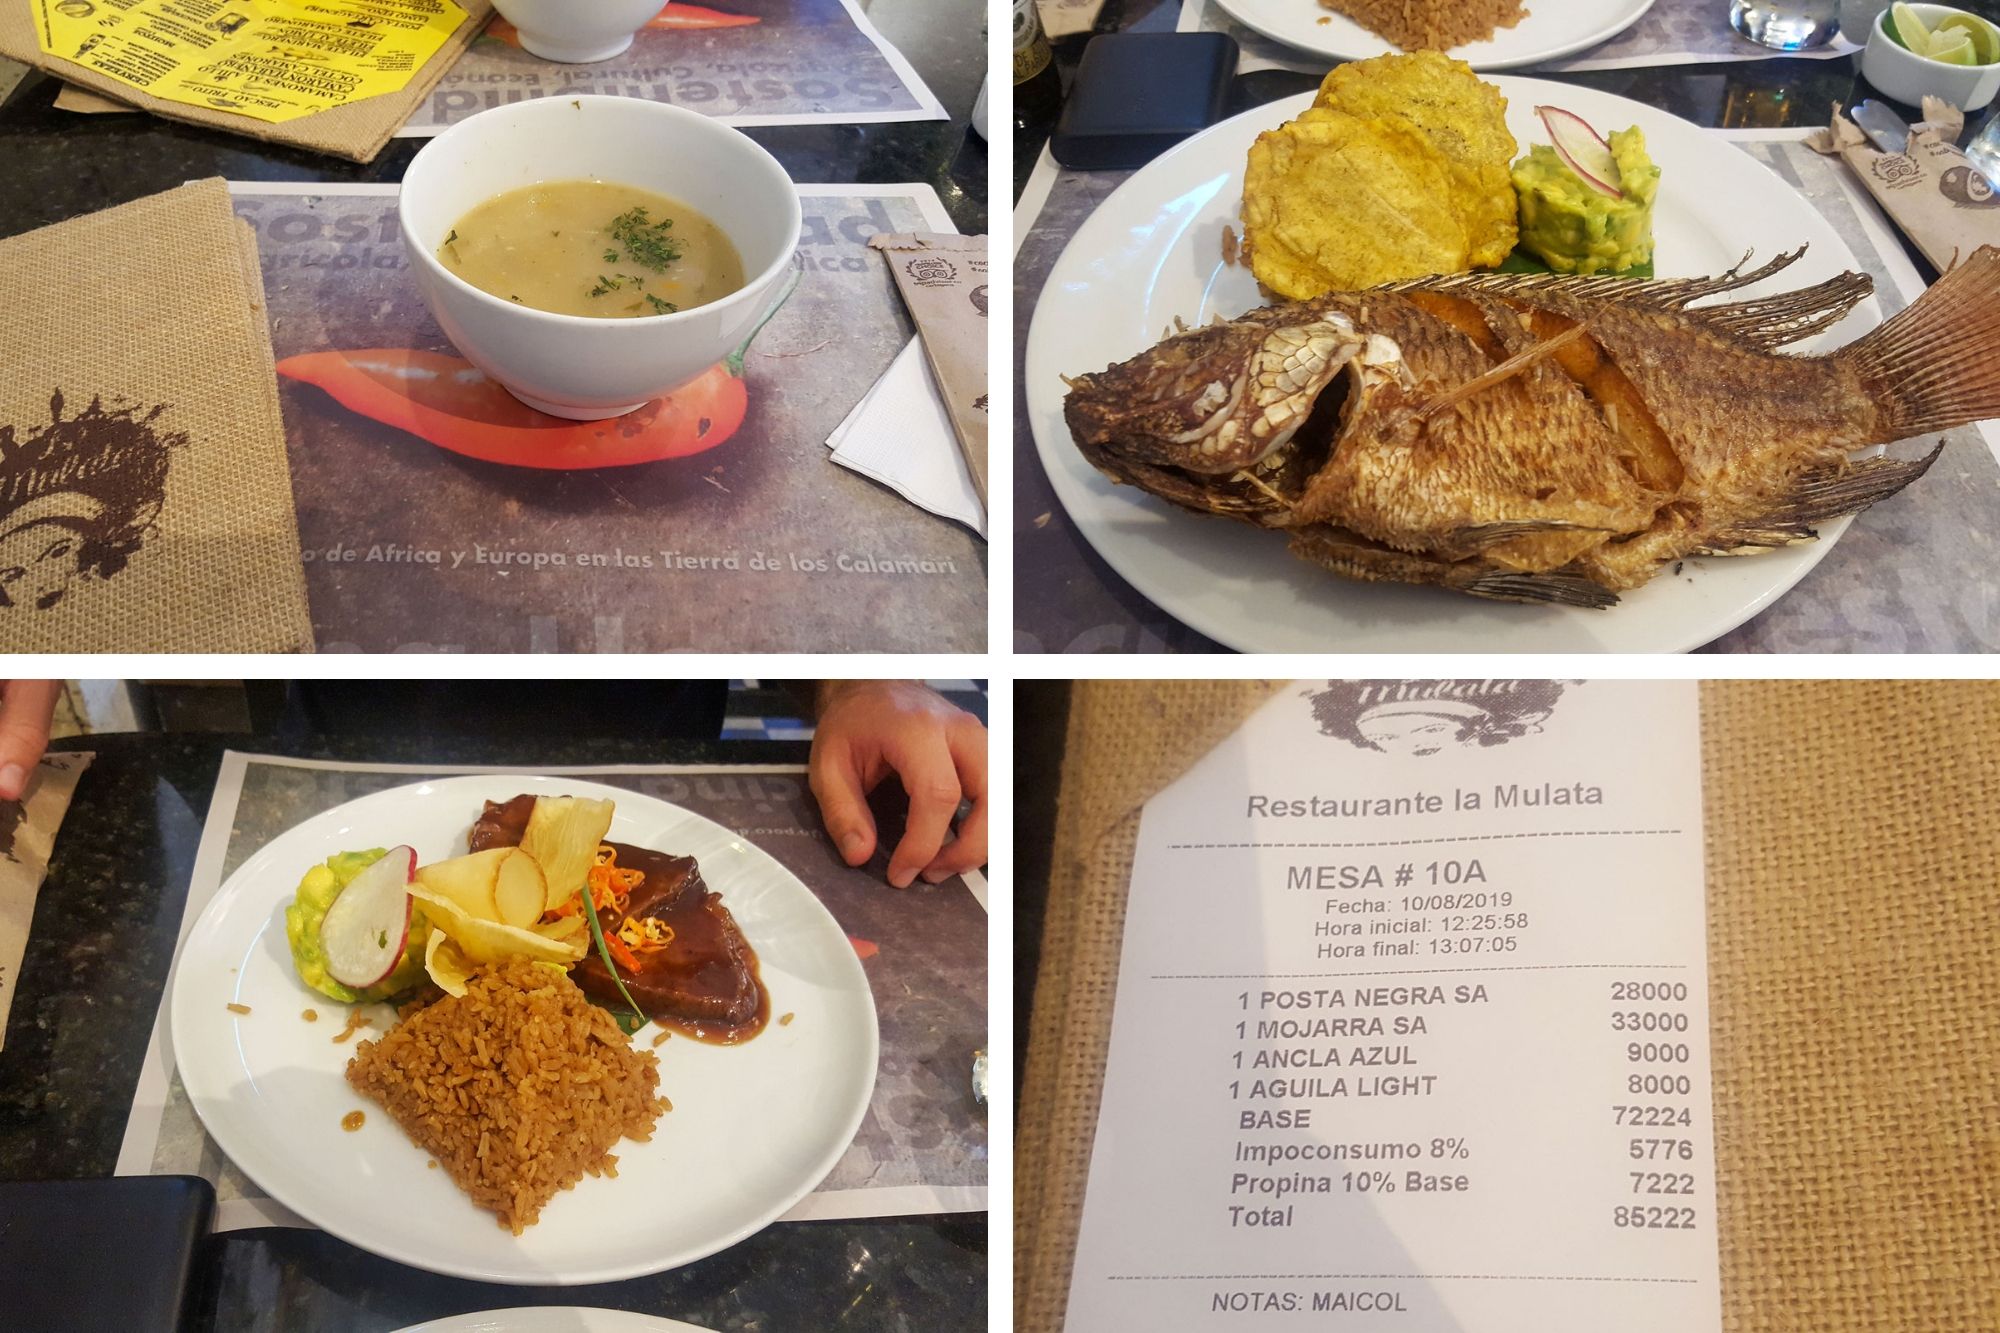 Collage: meal at la mulata: soup, fish, pork, and receipt